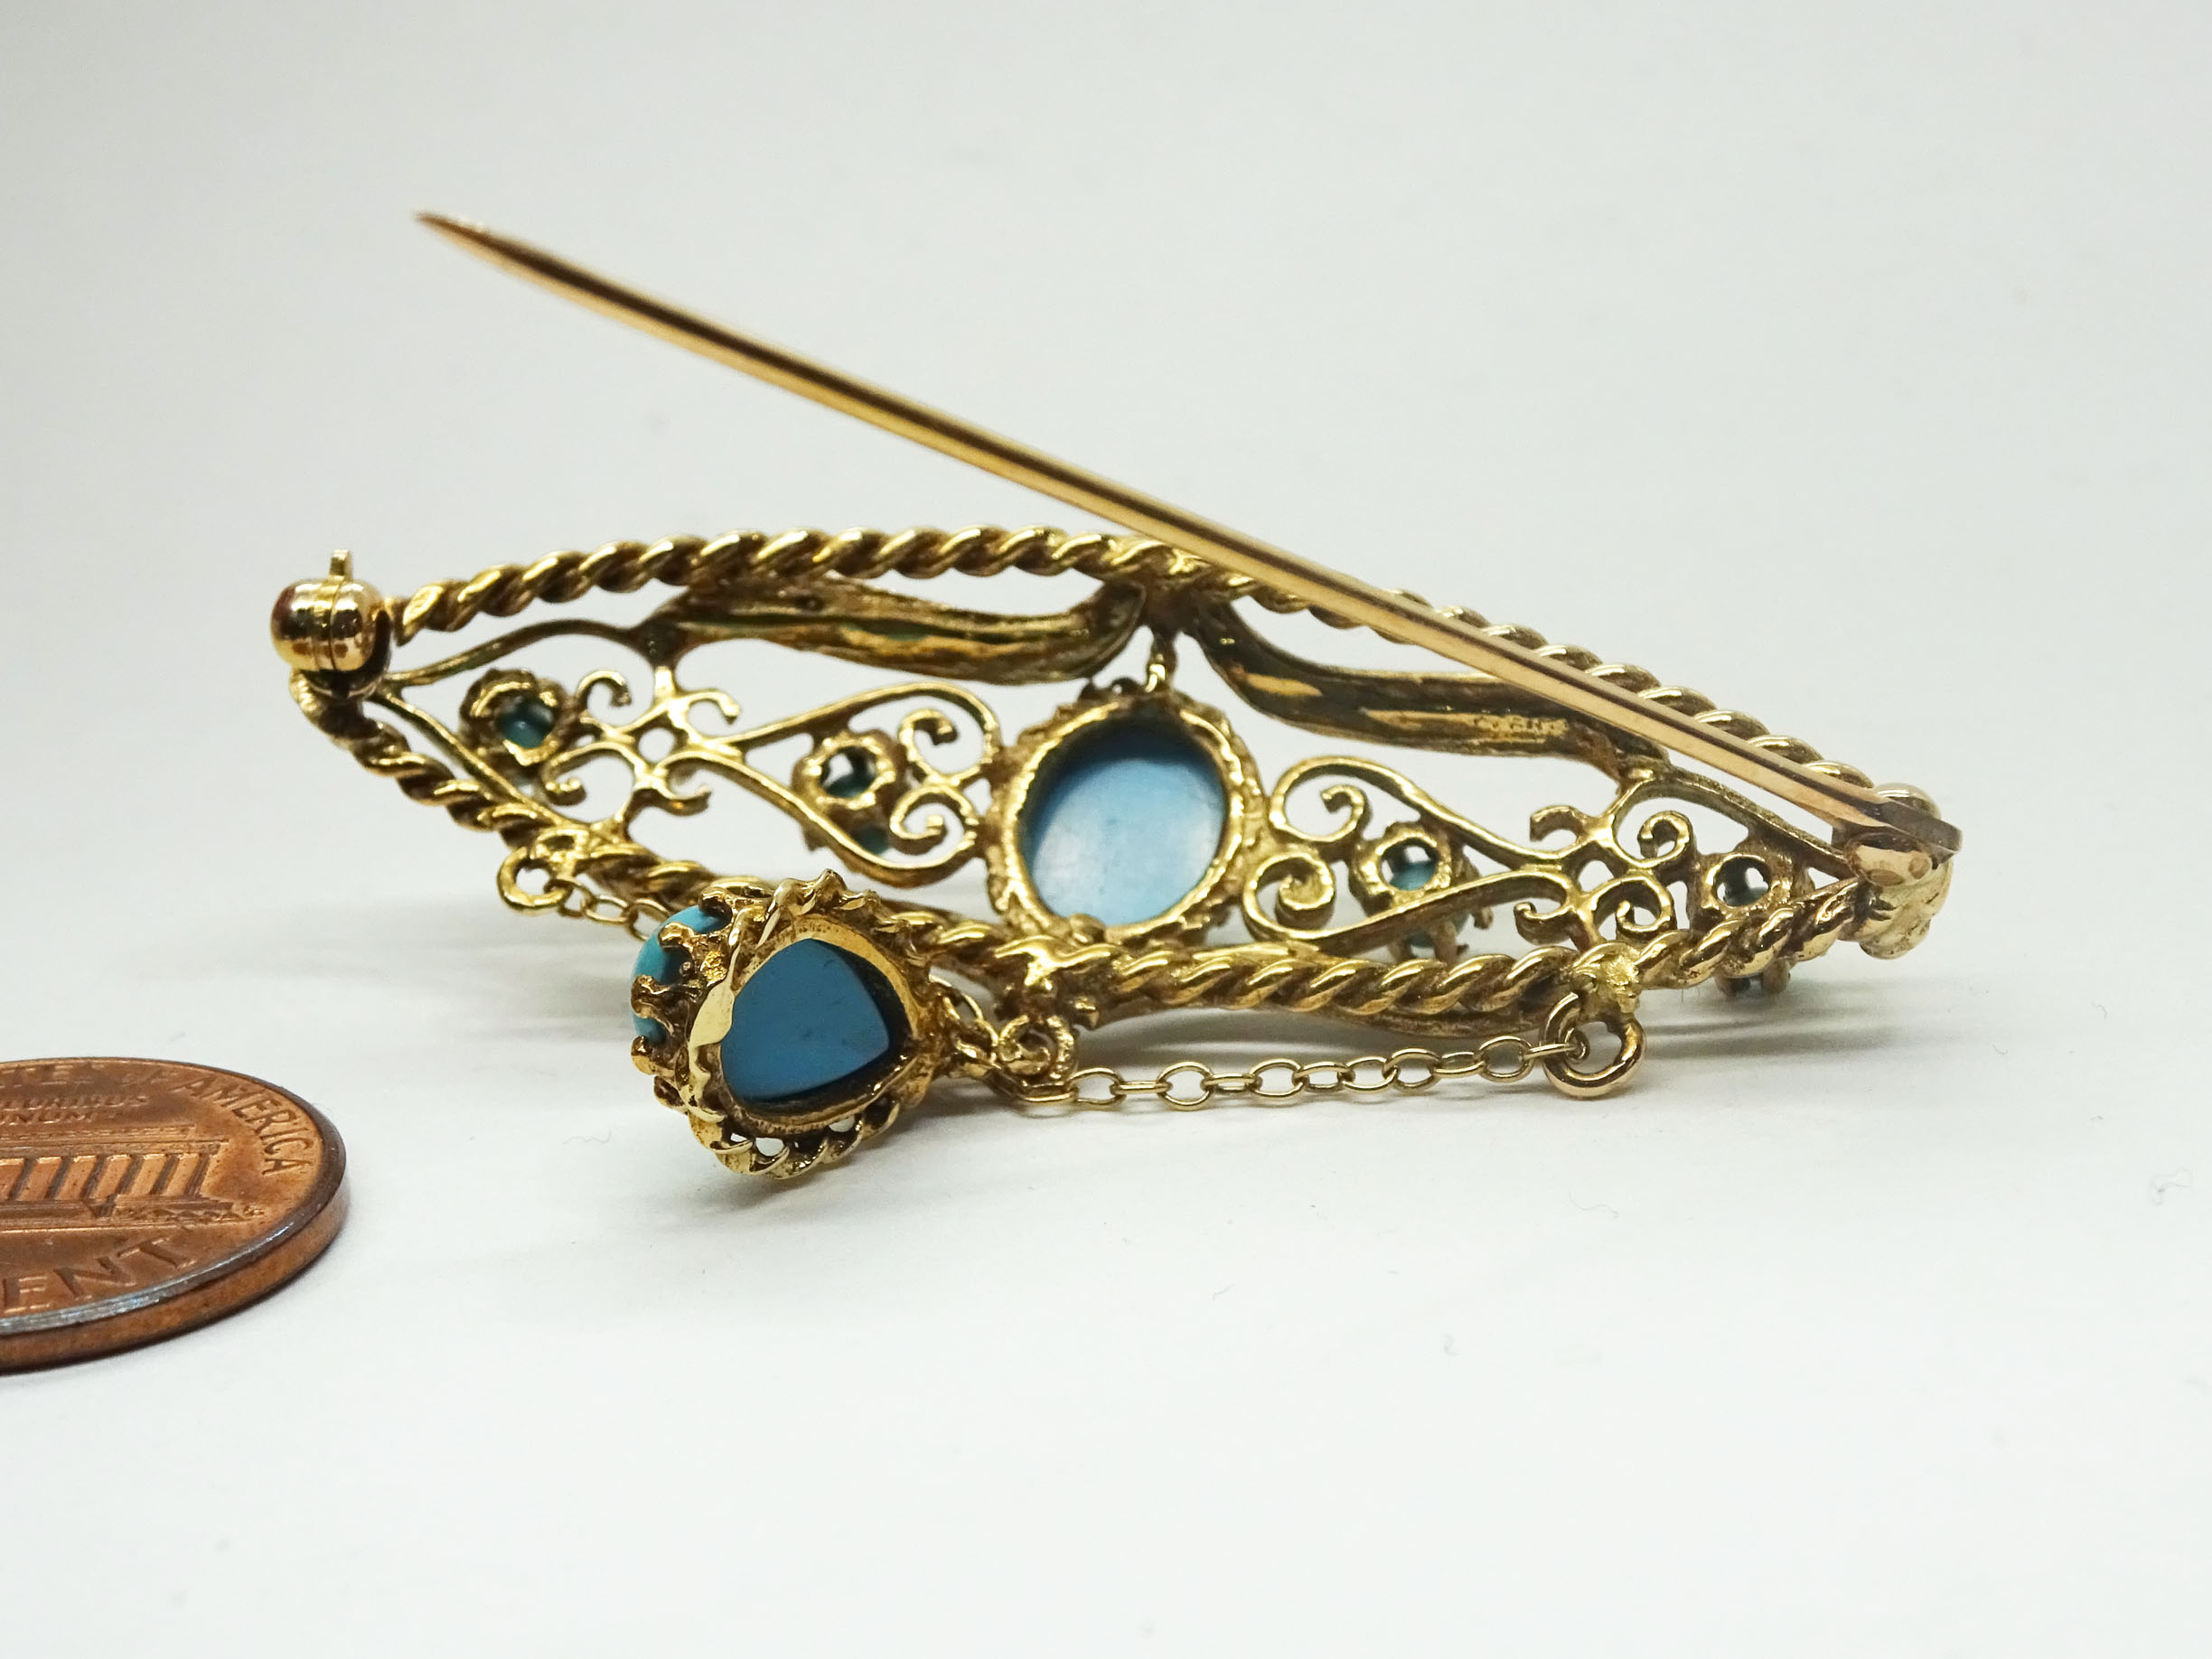 Vintage 14K Yellow Gold Turquoise & Seed Pearl Floral Brooch/Pin - Ruby Lane